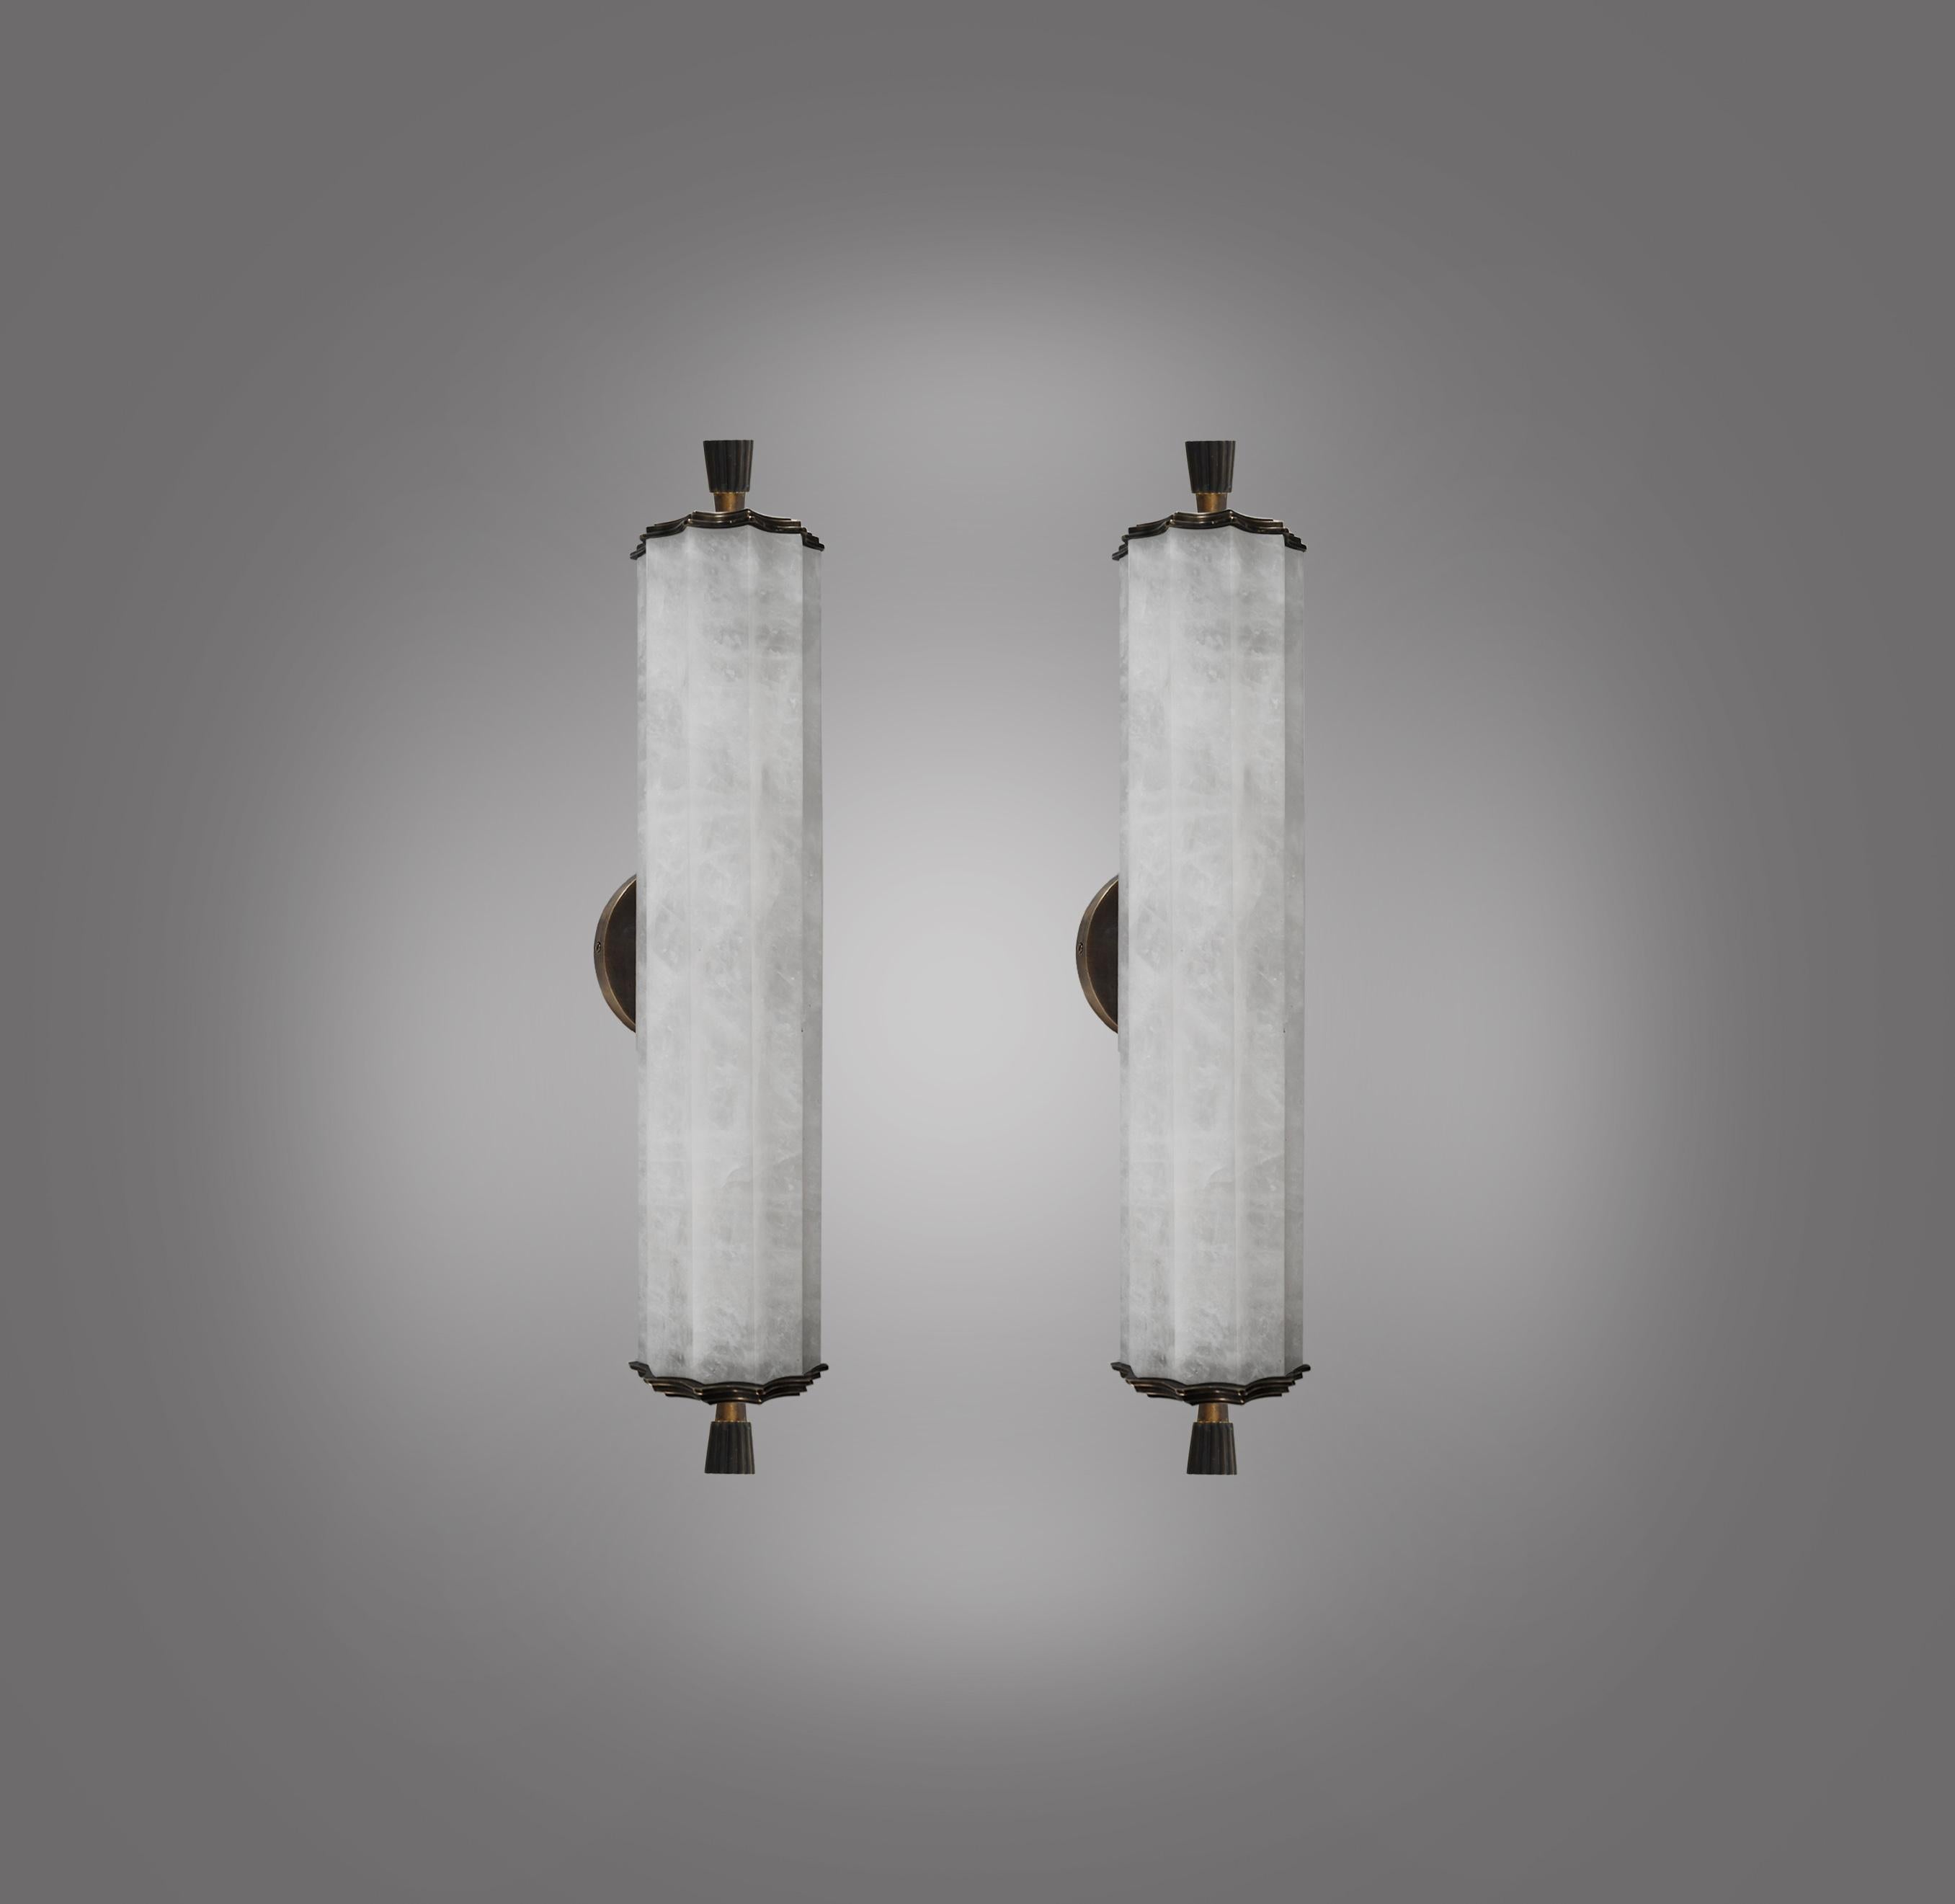 Pair of fine carved deco style rock crystal sconces with antique brass decorations. Created by Phoenix Gallery.
Two sockets installed.
Use two Led warm lights. 160 Watts in total.
Custom size upon request.